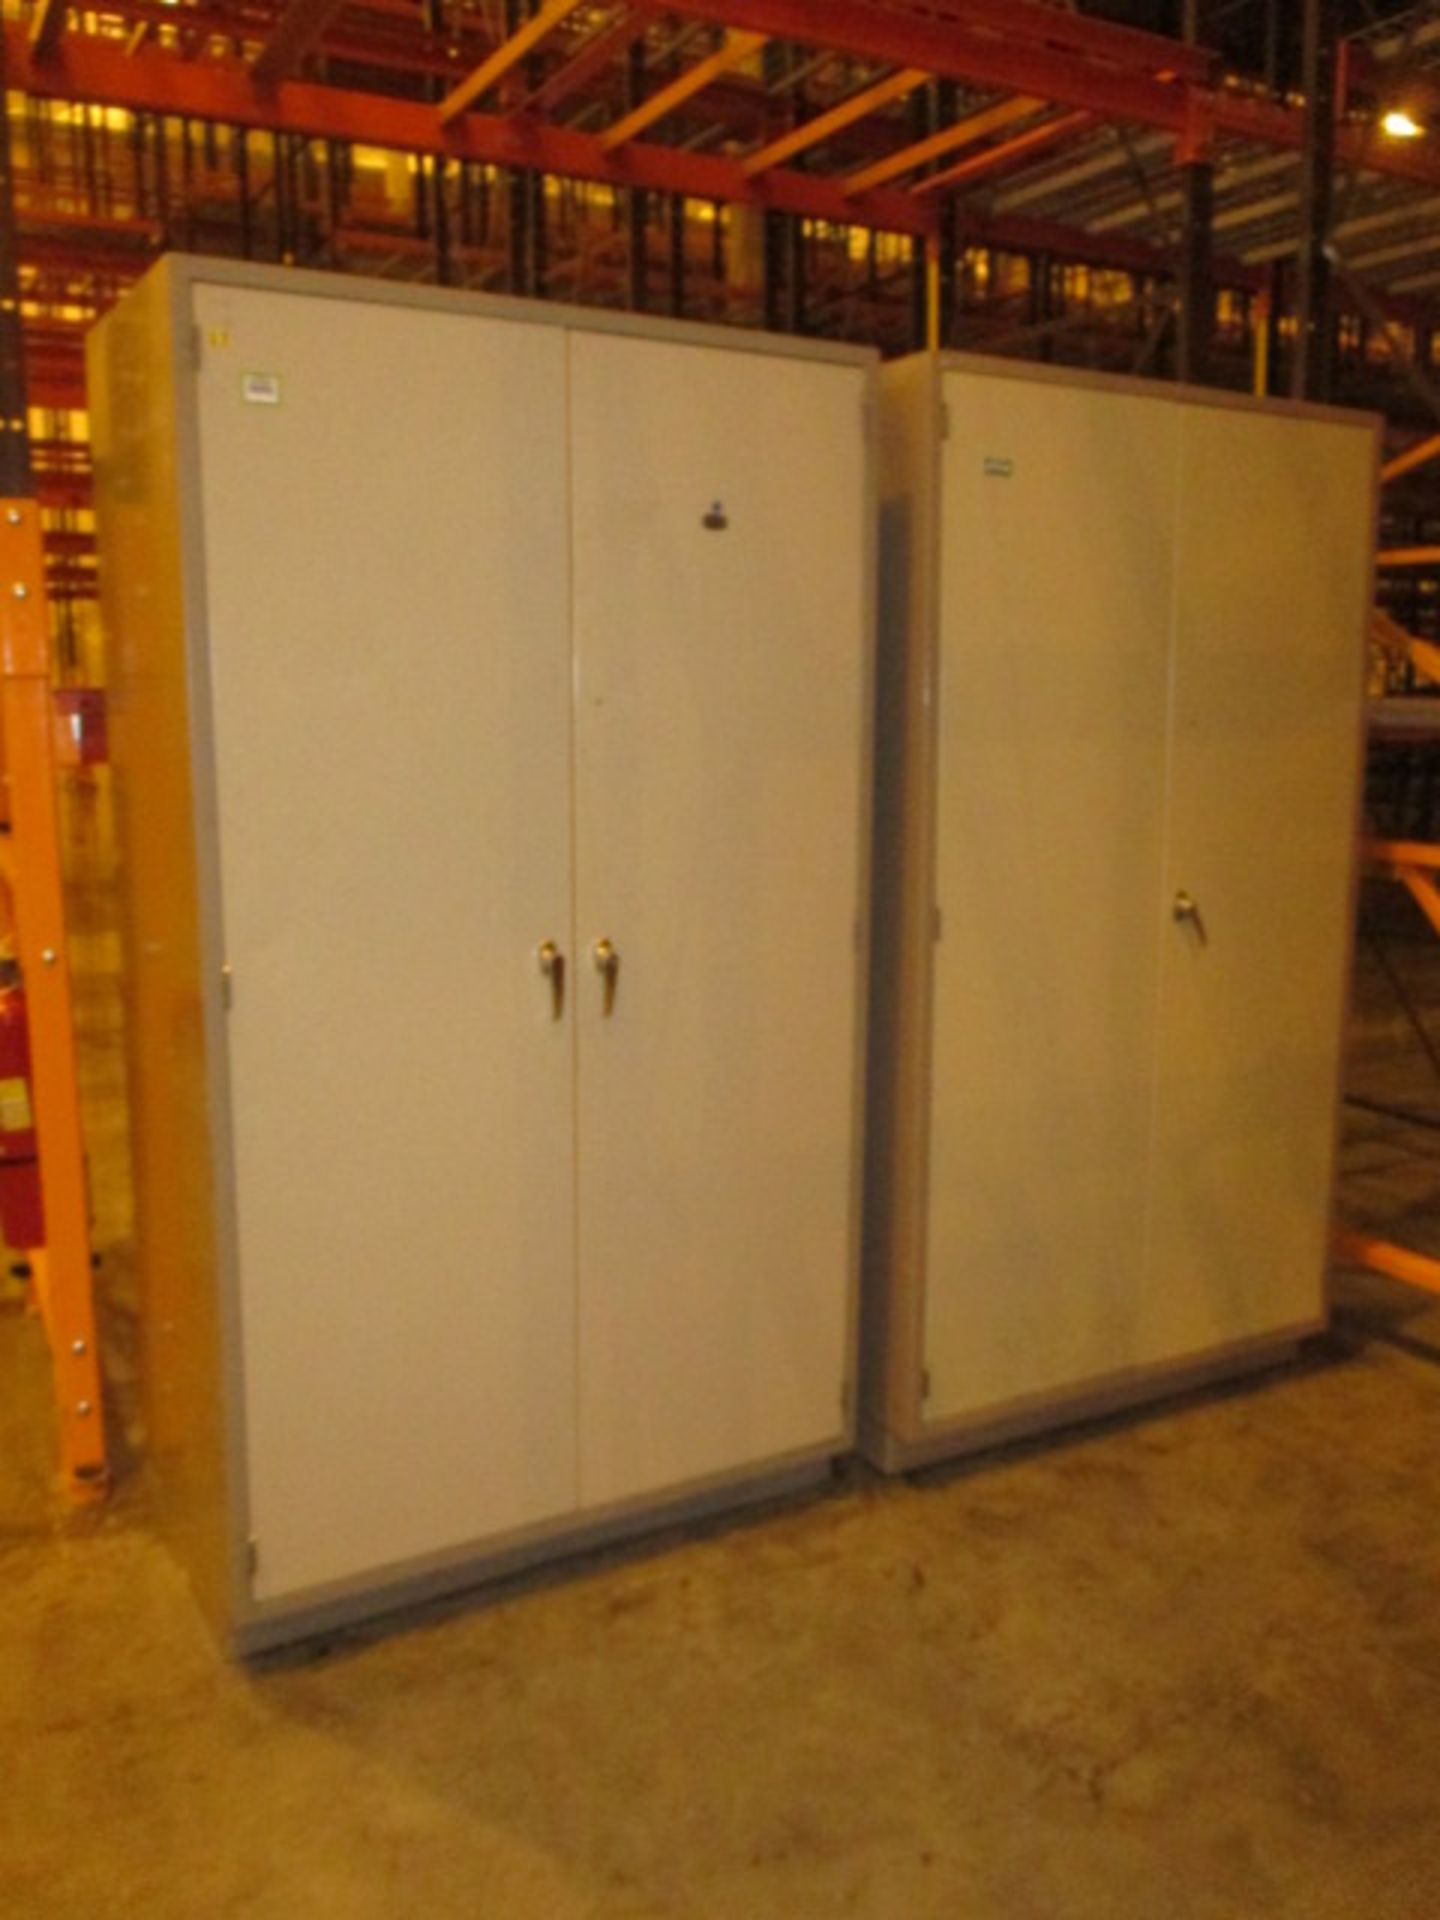 Storage Cabinets; Lot: (2) Storage Cabinets with Contents, 47x 24x 84 (in). HIT# 2222851. Loc: B25-